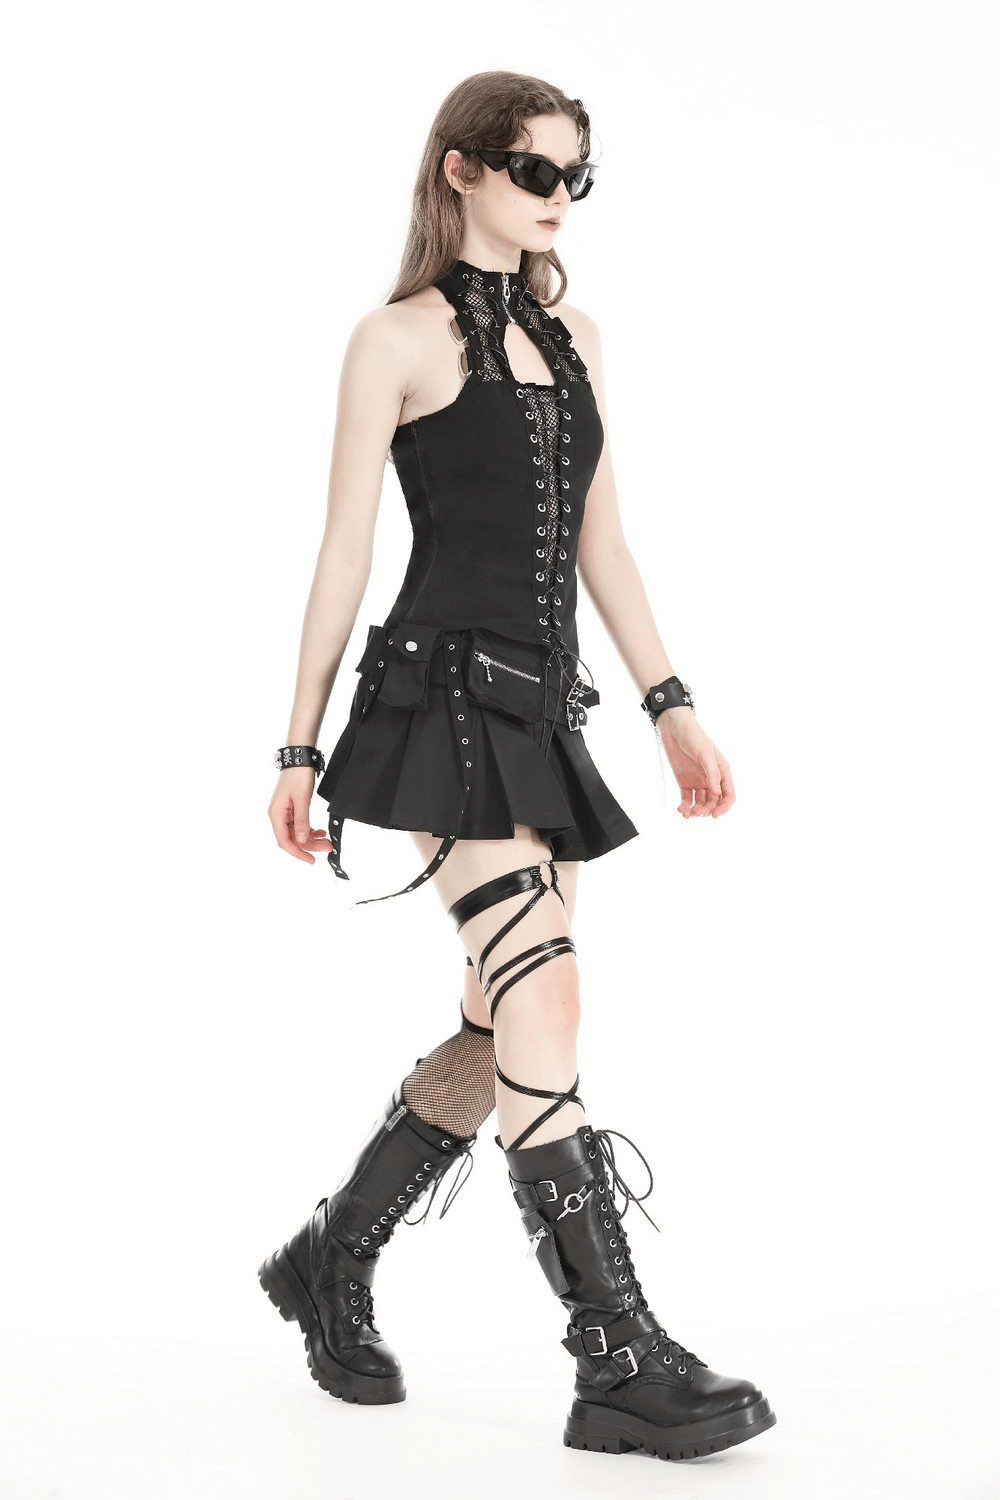 Edgy Black Lace-Up Gothic Top with Metal Grommets